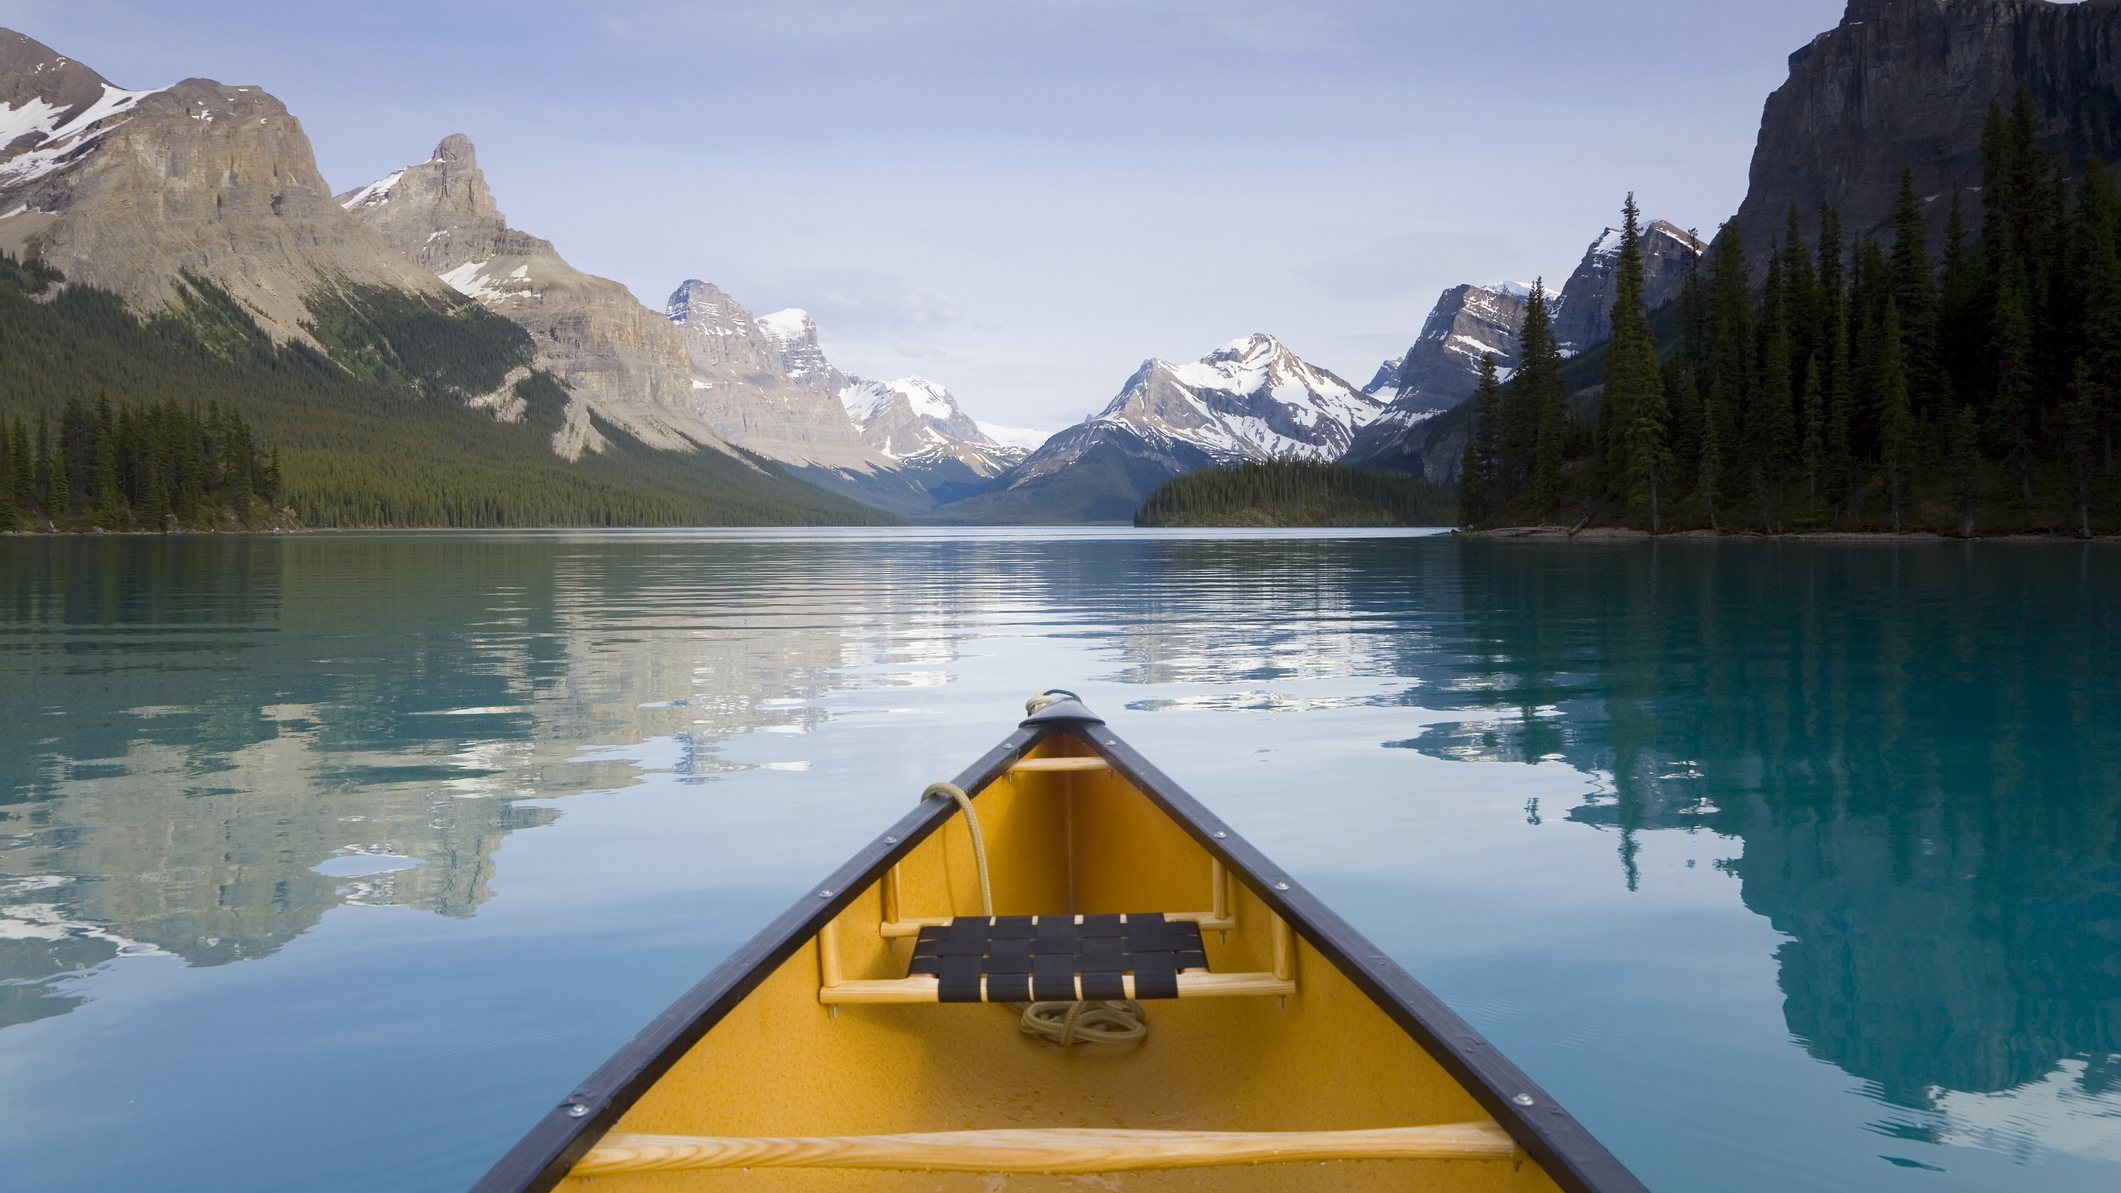 A yellow canoe sat on a calm lake with blue skies above